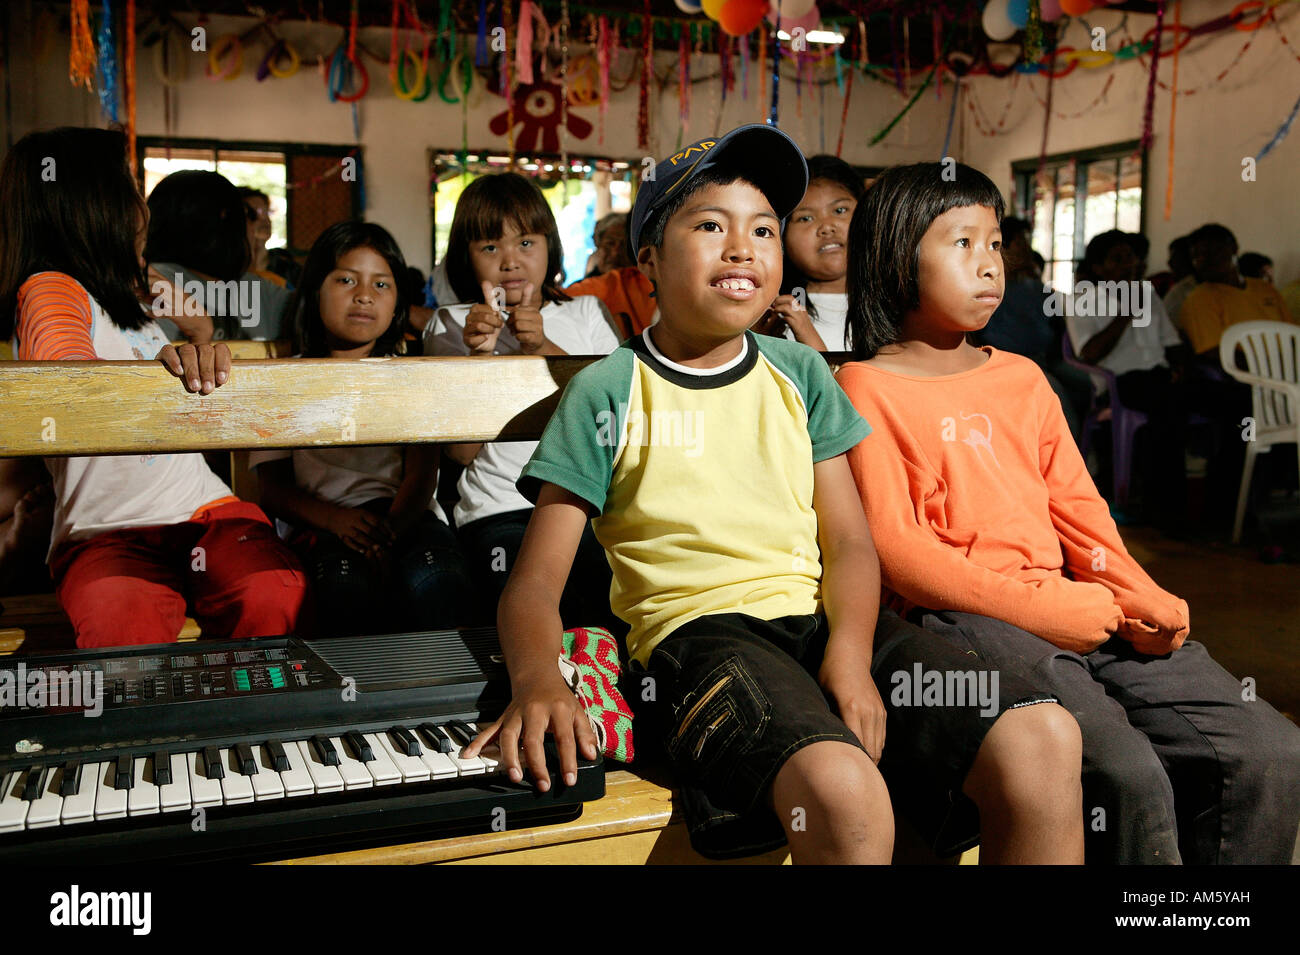 Indian children sitting next to an e-piano, Loma Plata, Chaco, Paraguay, South America Stock Photo